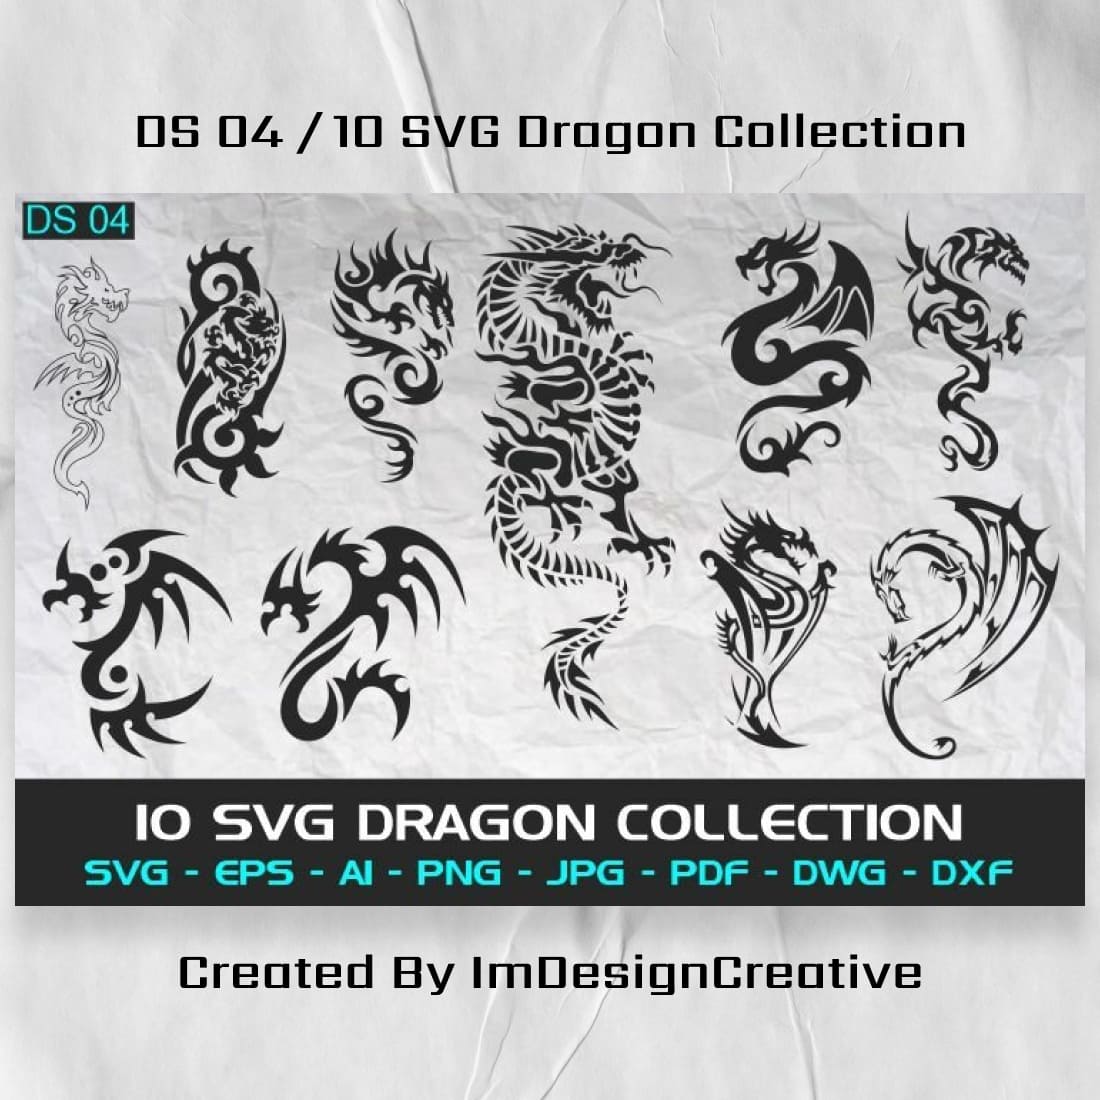 Bunch of dragon tattoos on a piece of paper.